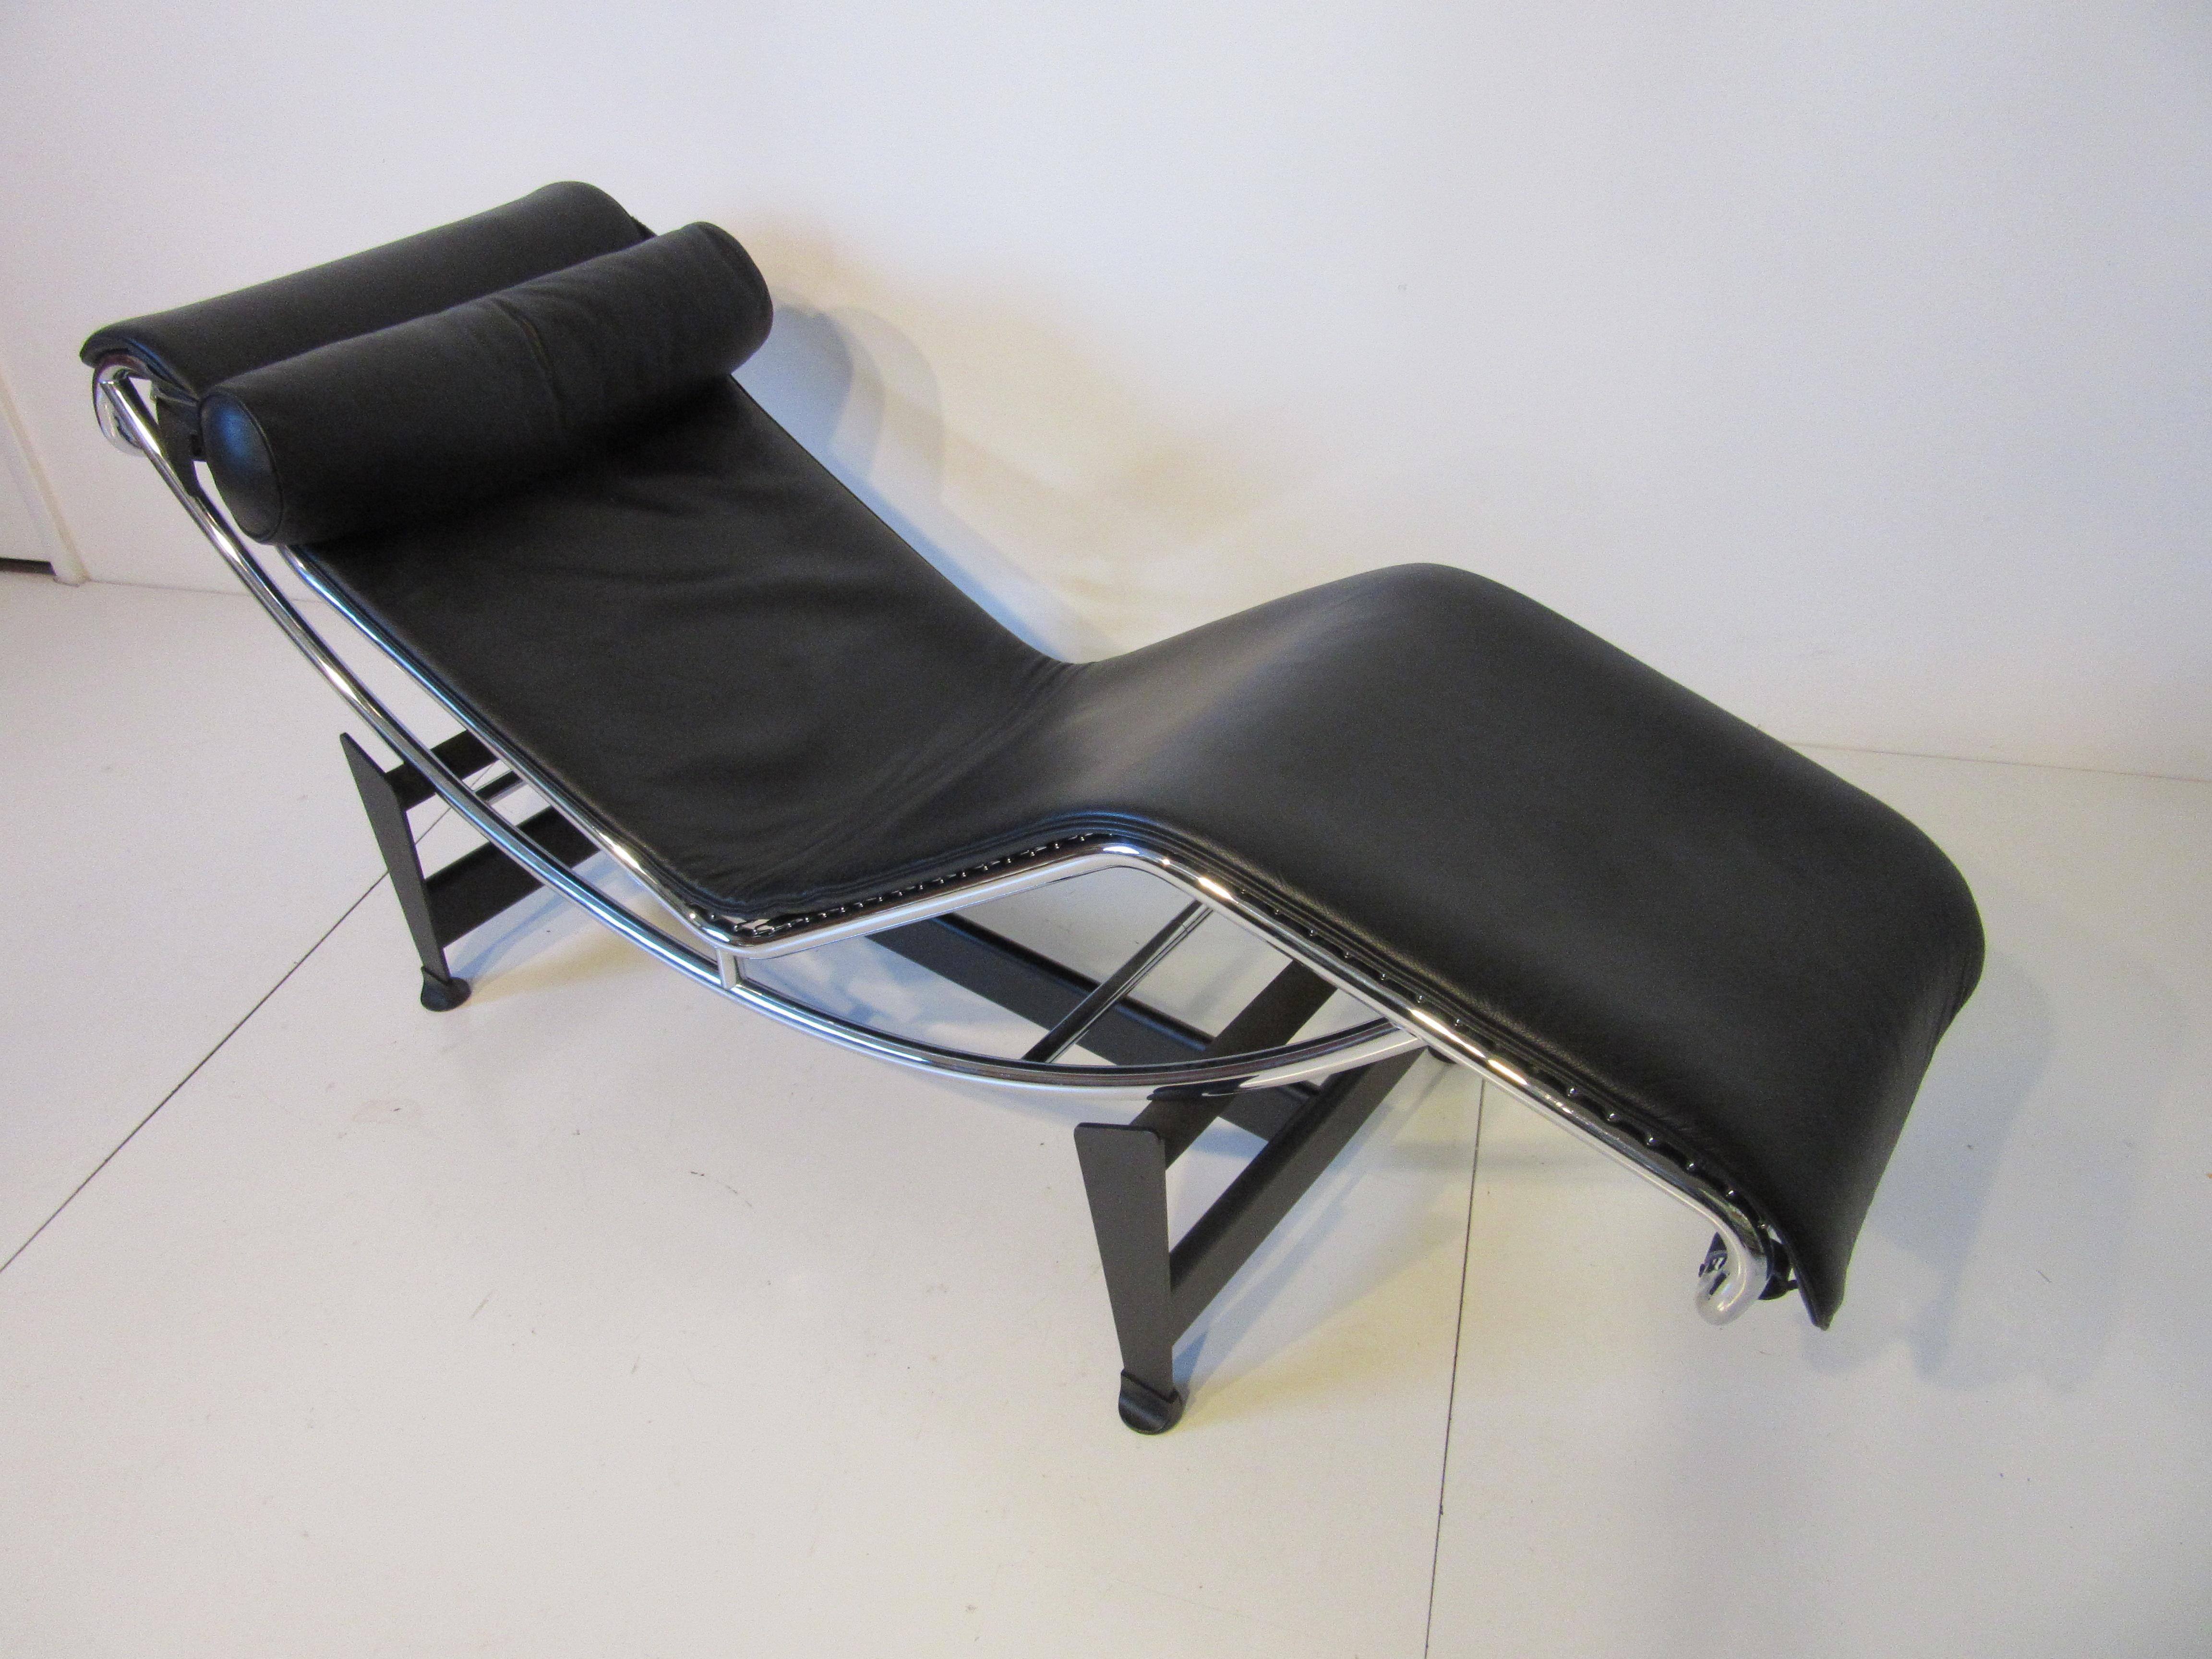 A Iconic two-piece LC-4 lounger with soft black leather pad and head pillow with chrome frame , woven nylon straps sitting on a black metal base. The chair adjusts on it's base to any comfort level making it one of the best lounges ever designed.